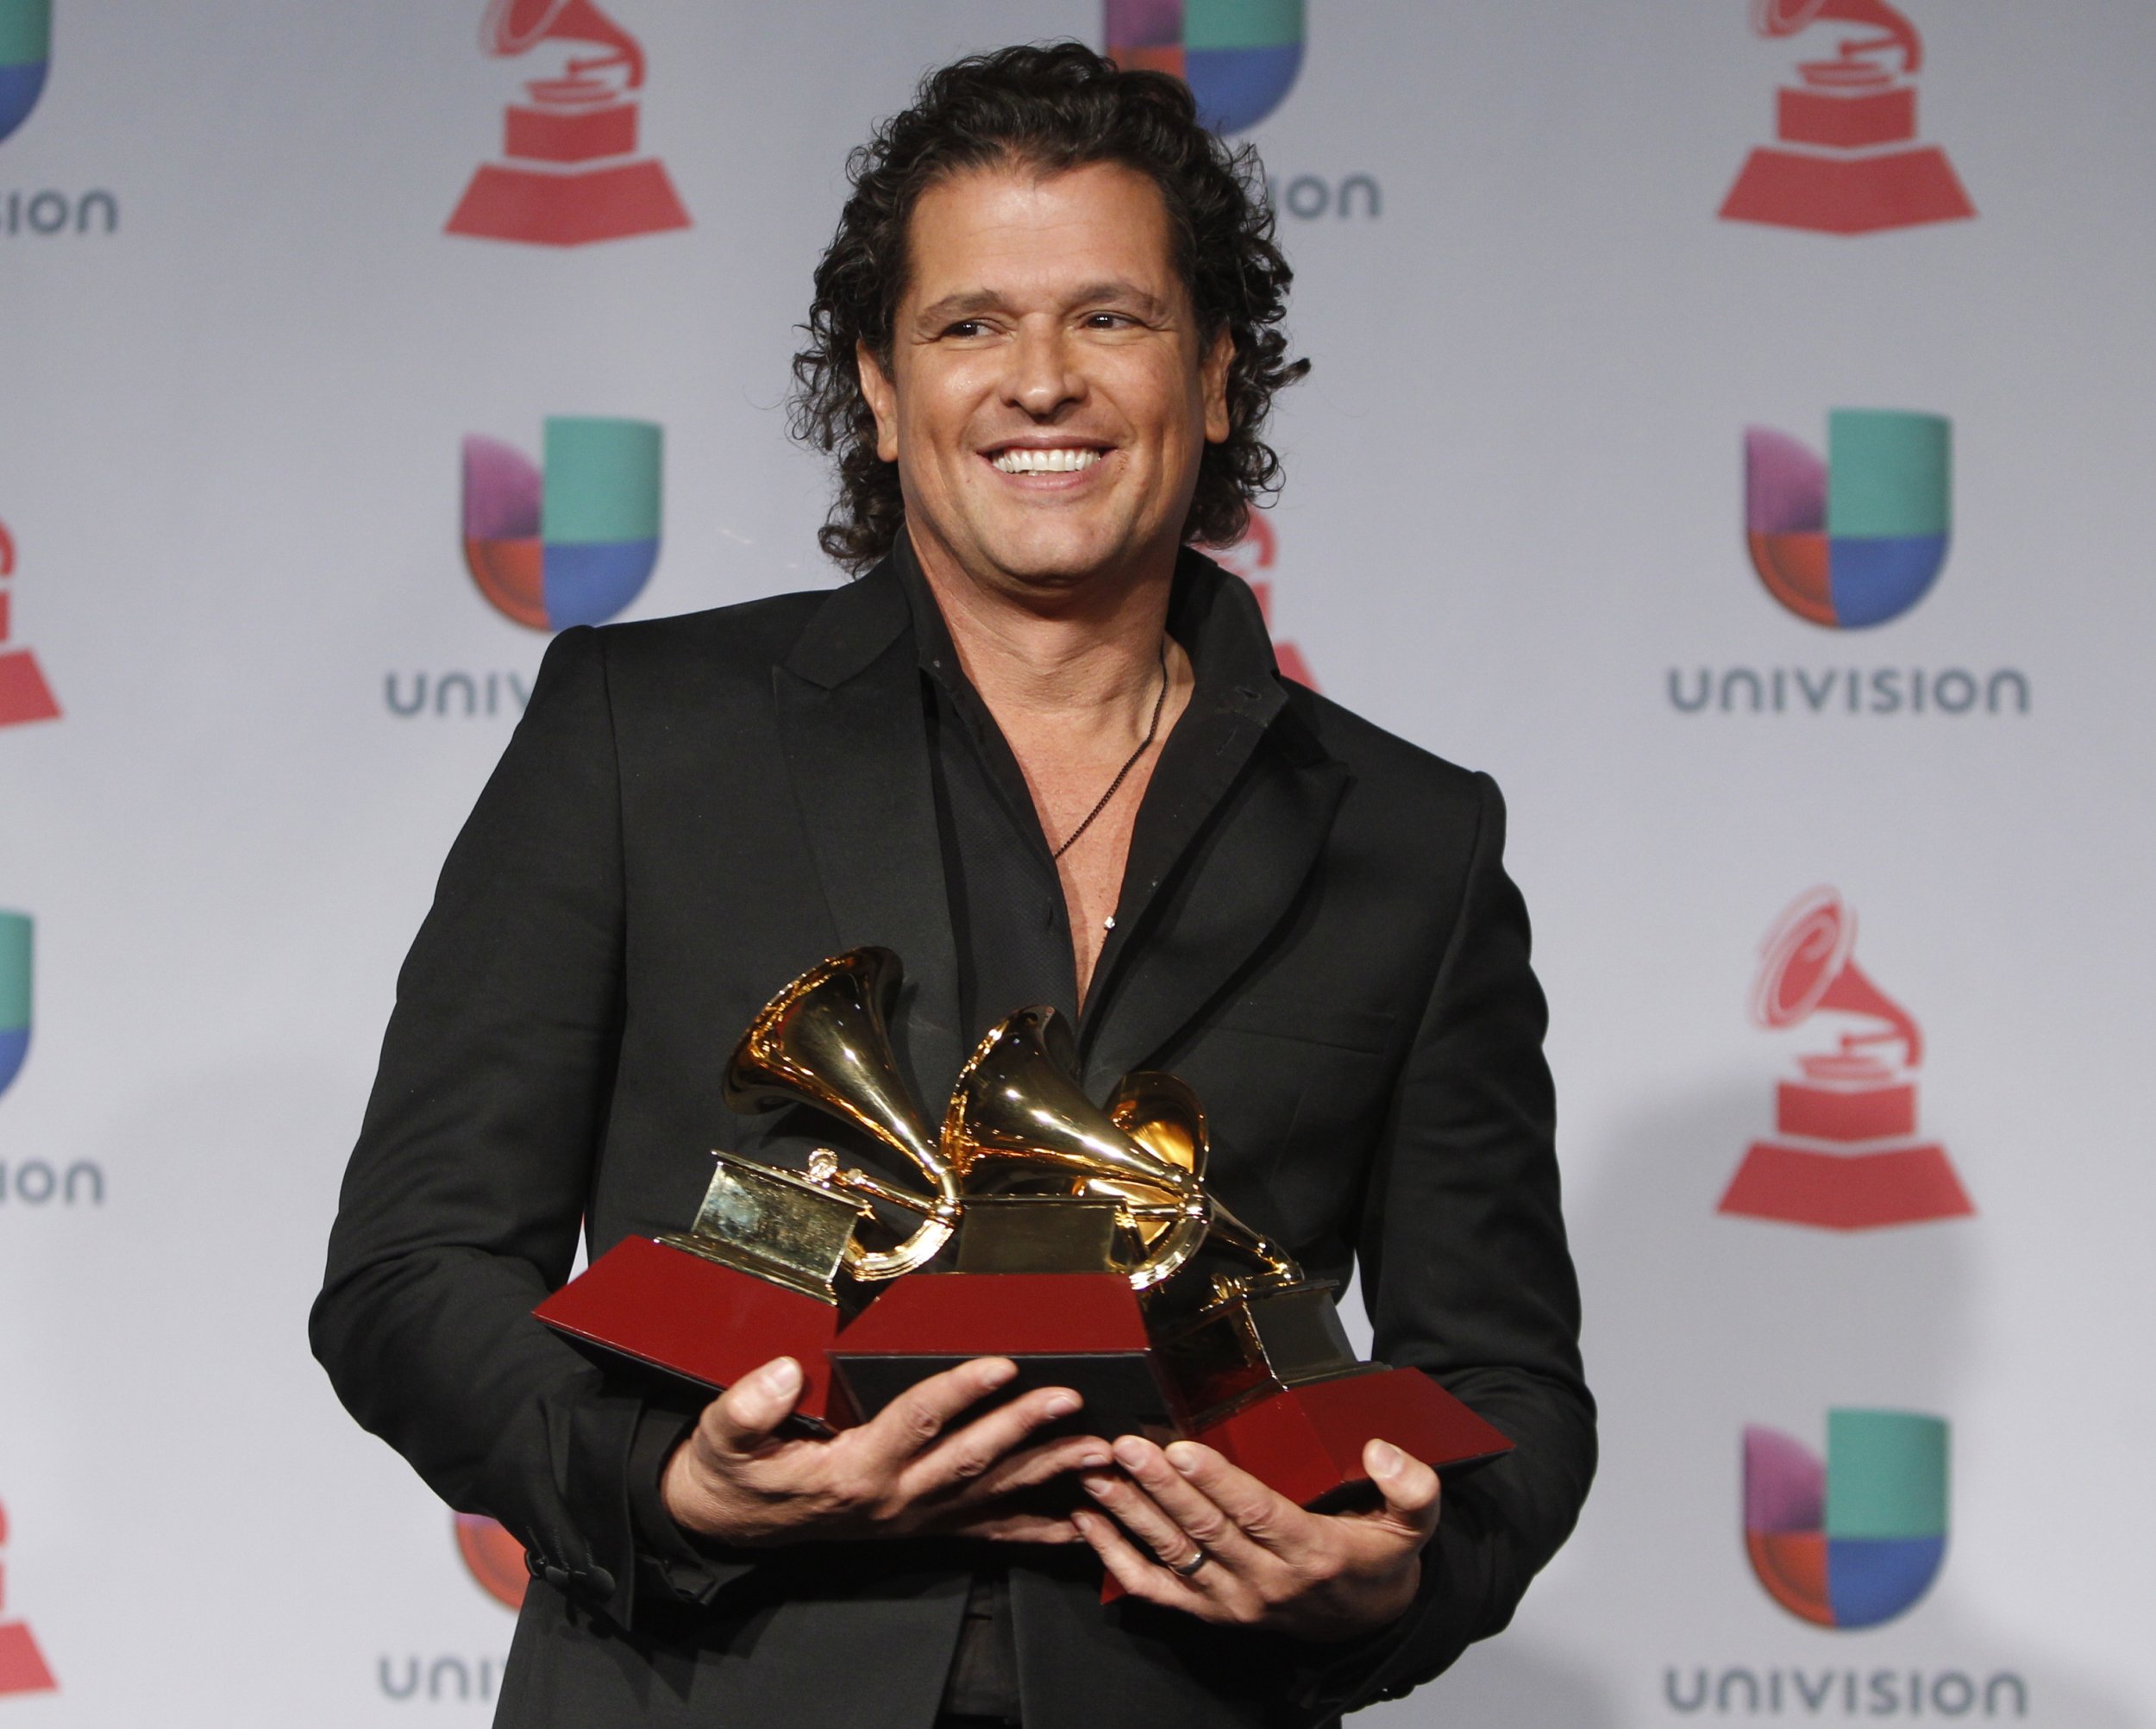 Latin Grammy 2014 What To Expect From This Year’s Awards, Plus